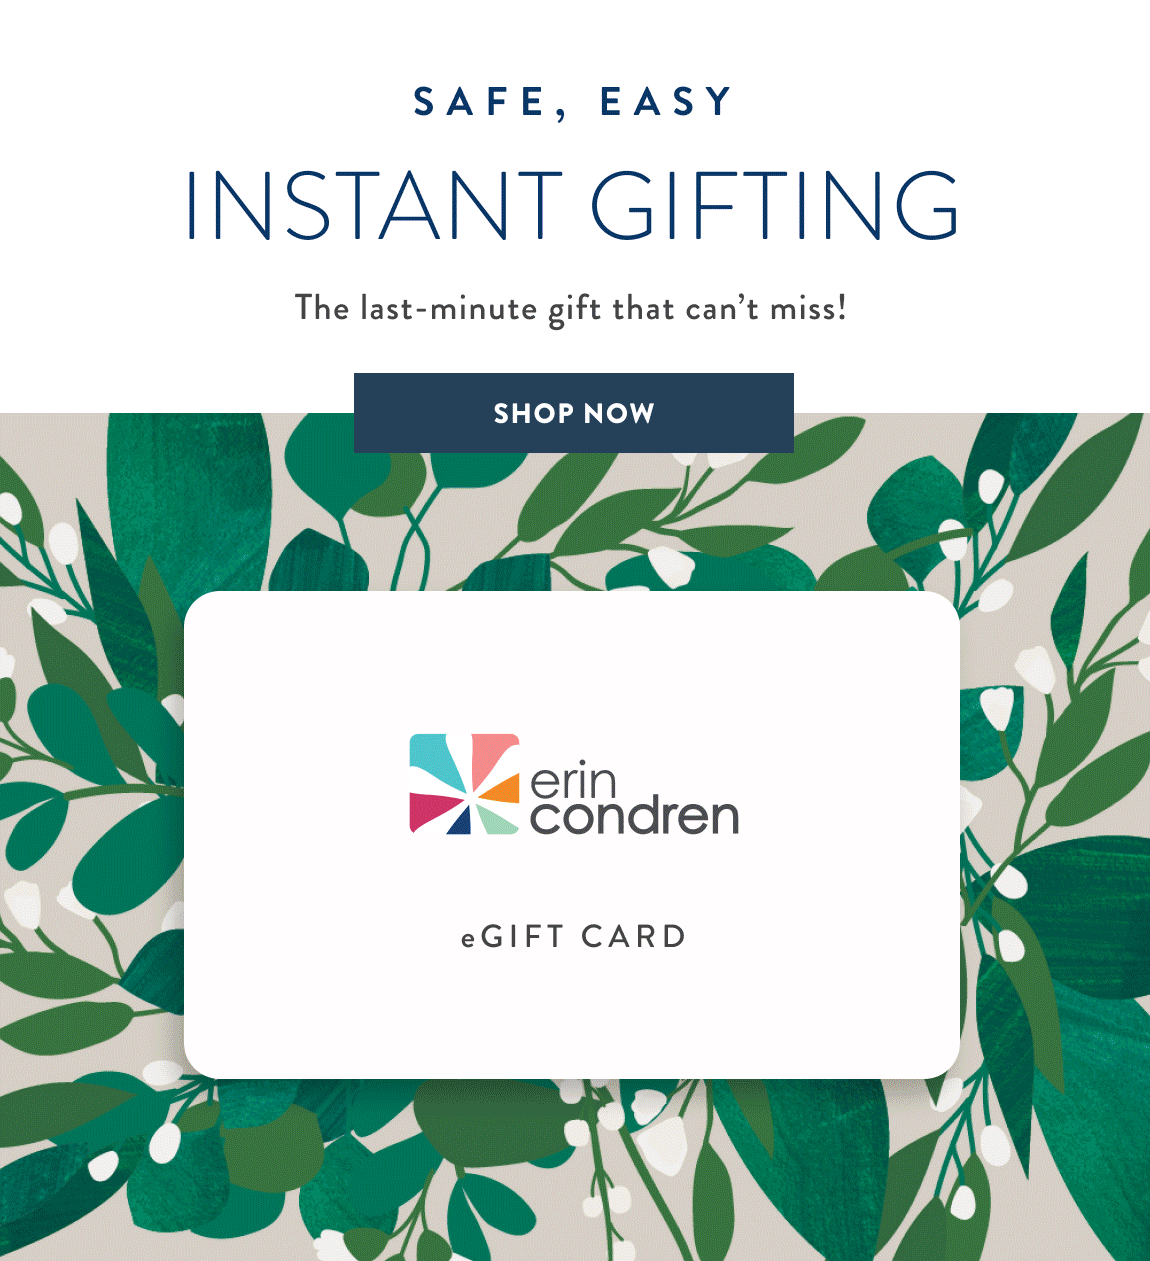 INSTANT GIFTING WITH EGIFT CARDS >